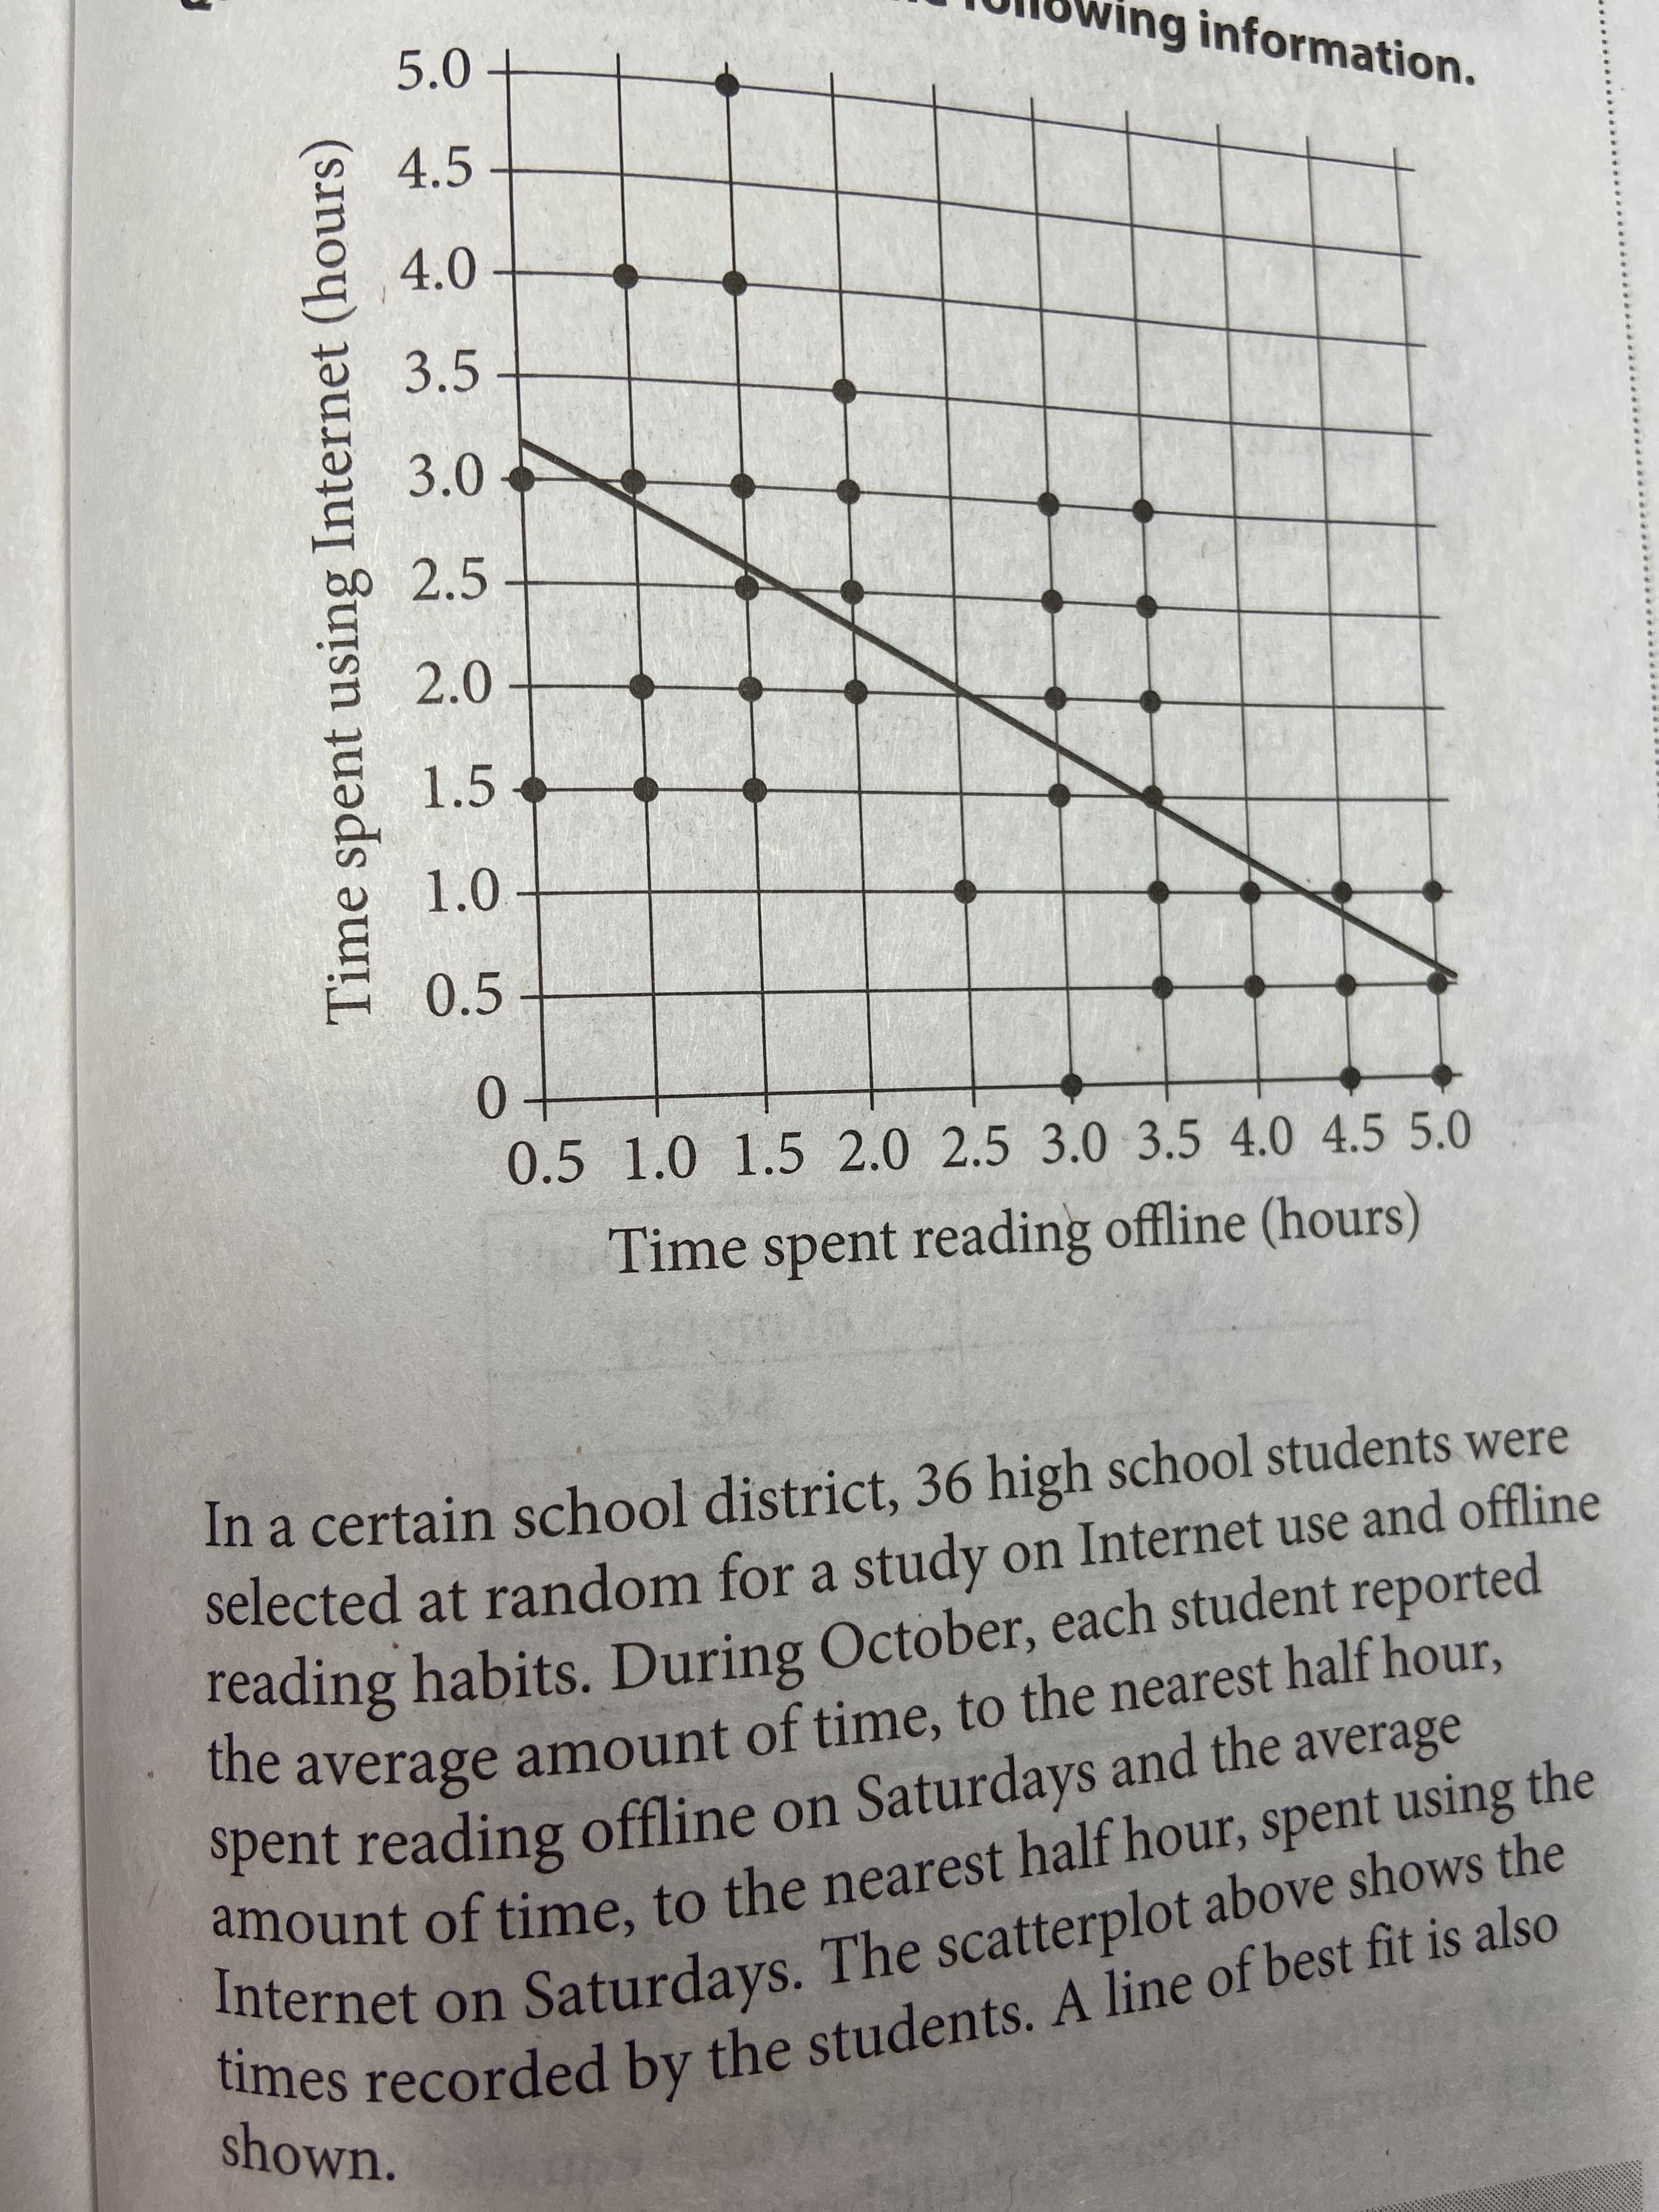 Time spent using Internet (hours)
times by the students. A line of best fit is also
amount of time, to the half hour, spent t
lowing information.
4.5
4.0
3.5
3.0
2.5
2.0
1.5-
10.
0.5
0.
0.5 1.0 1.5 2.0 2.5 3.0 3.5 4.0 4.5 5.0
Time spent reading offline (hours)
In a certain school district, 36 high school students were
selected at random for a study on Internet use and offline
reading habits. During October, each student reported
ie average amount of time, to the nearest half hour,
spent reading offline on Saturdays and the average
amount of time, to the nearest half hour, spent using the
lternet on Saturdays. The scatterplot above shows the
the
ies recorded by the students. A line of best fit is also
shown.
